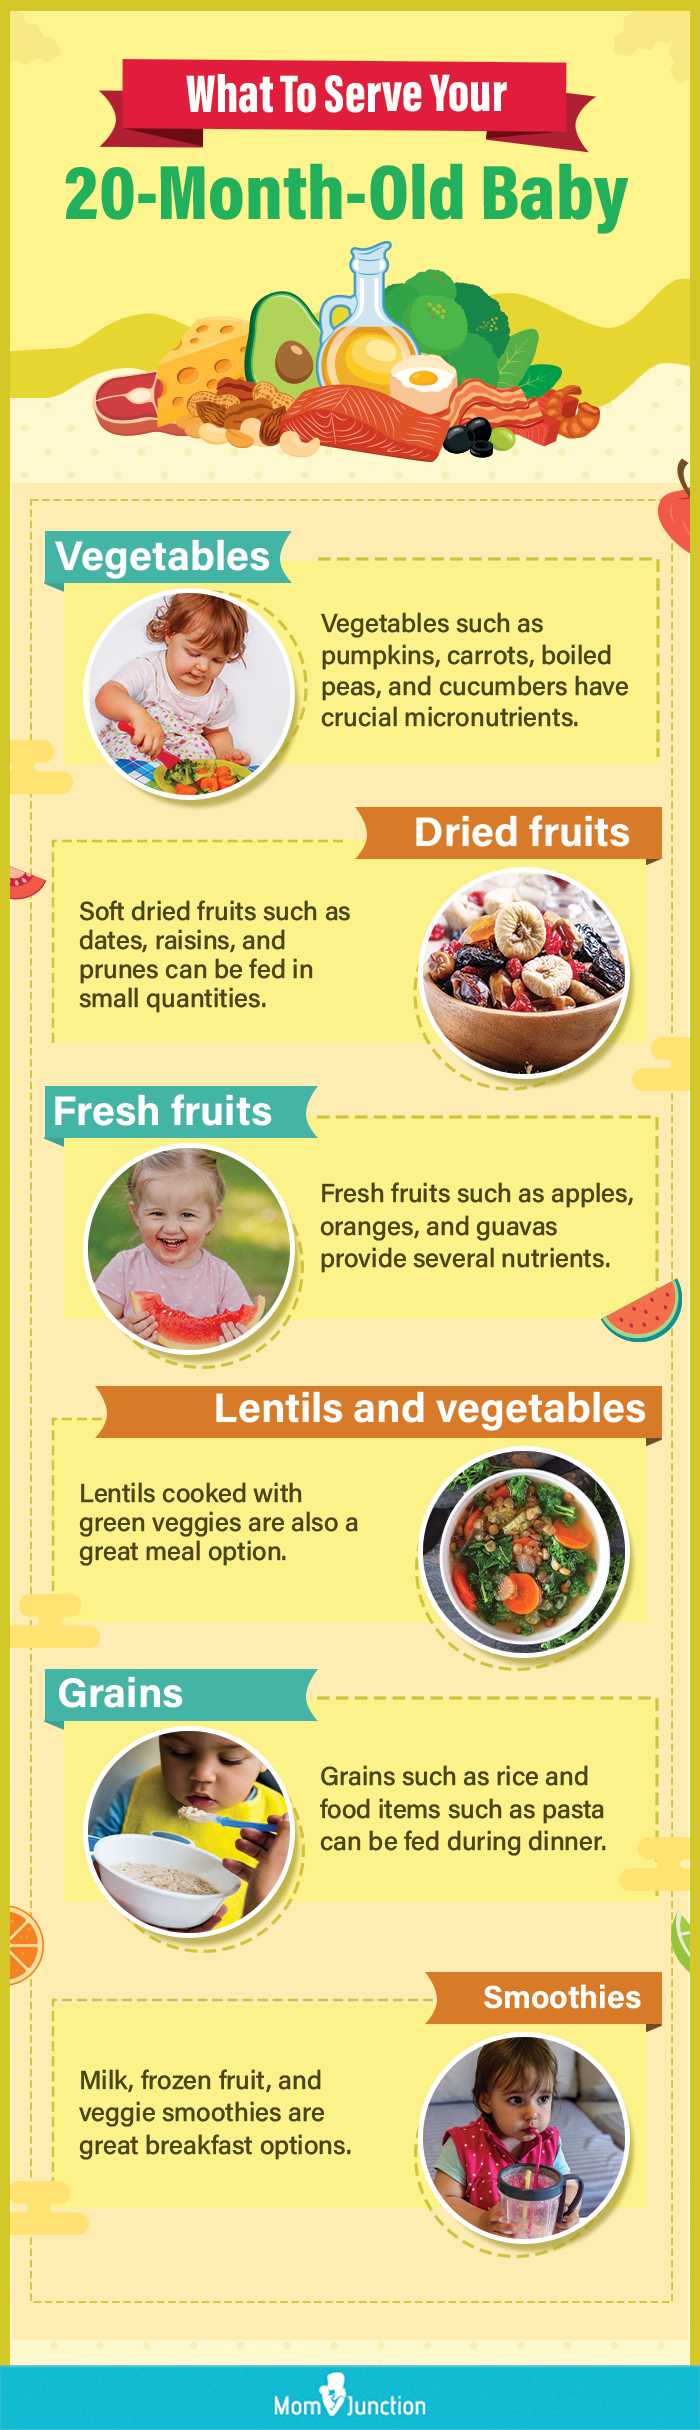 what to serve your 20 month old baby (infographic)